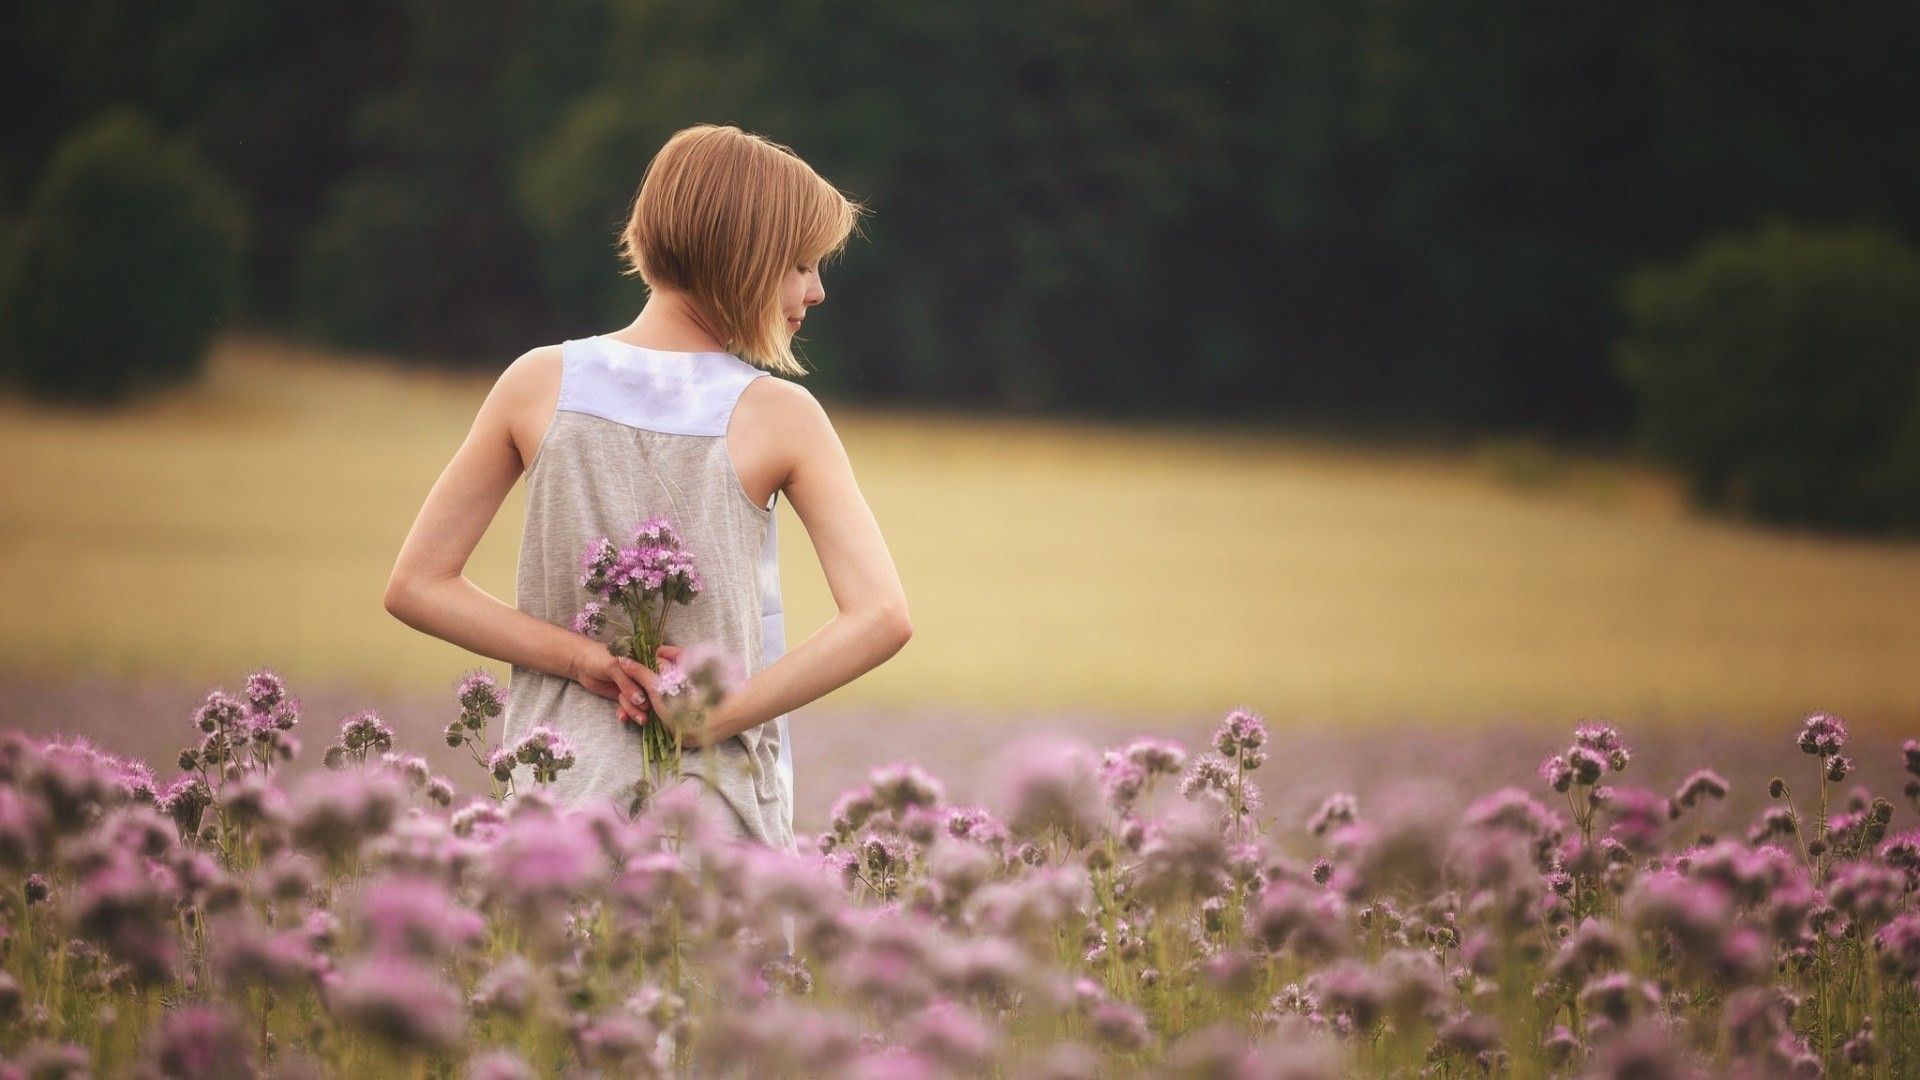 Girl With Flowers Standing In Field Wallpaper